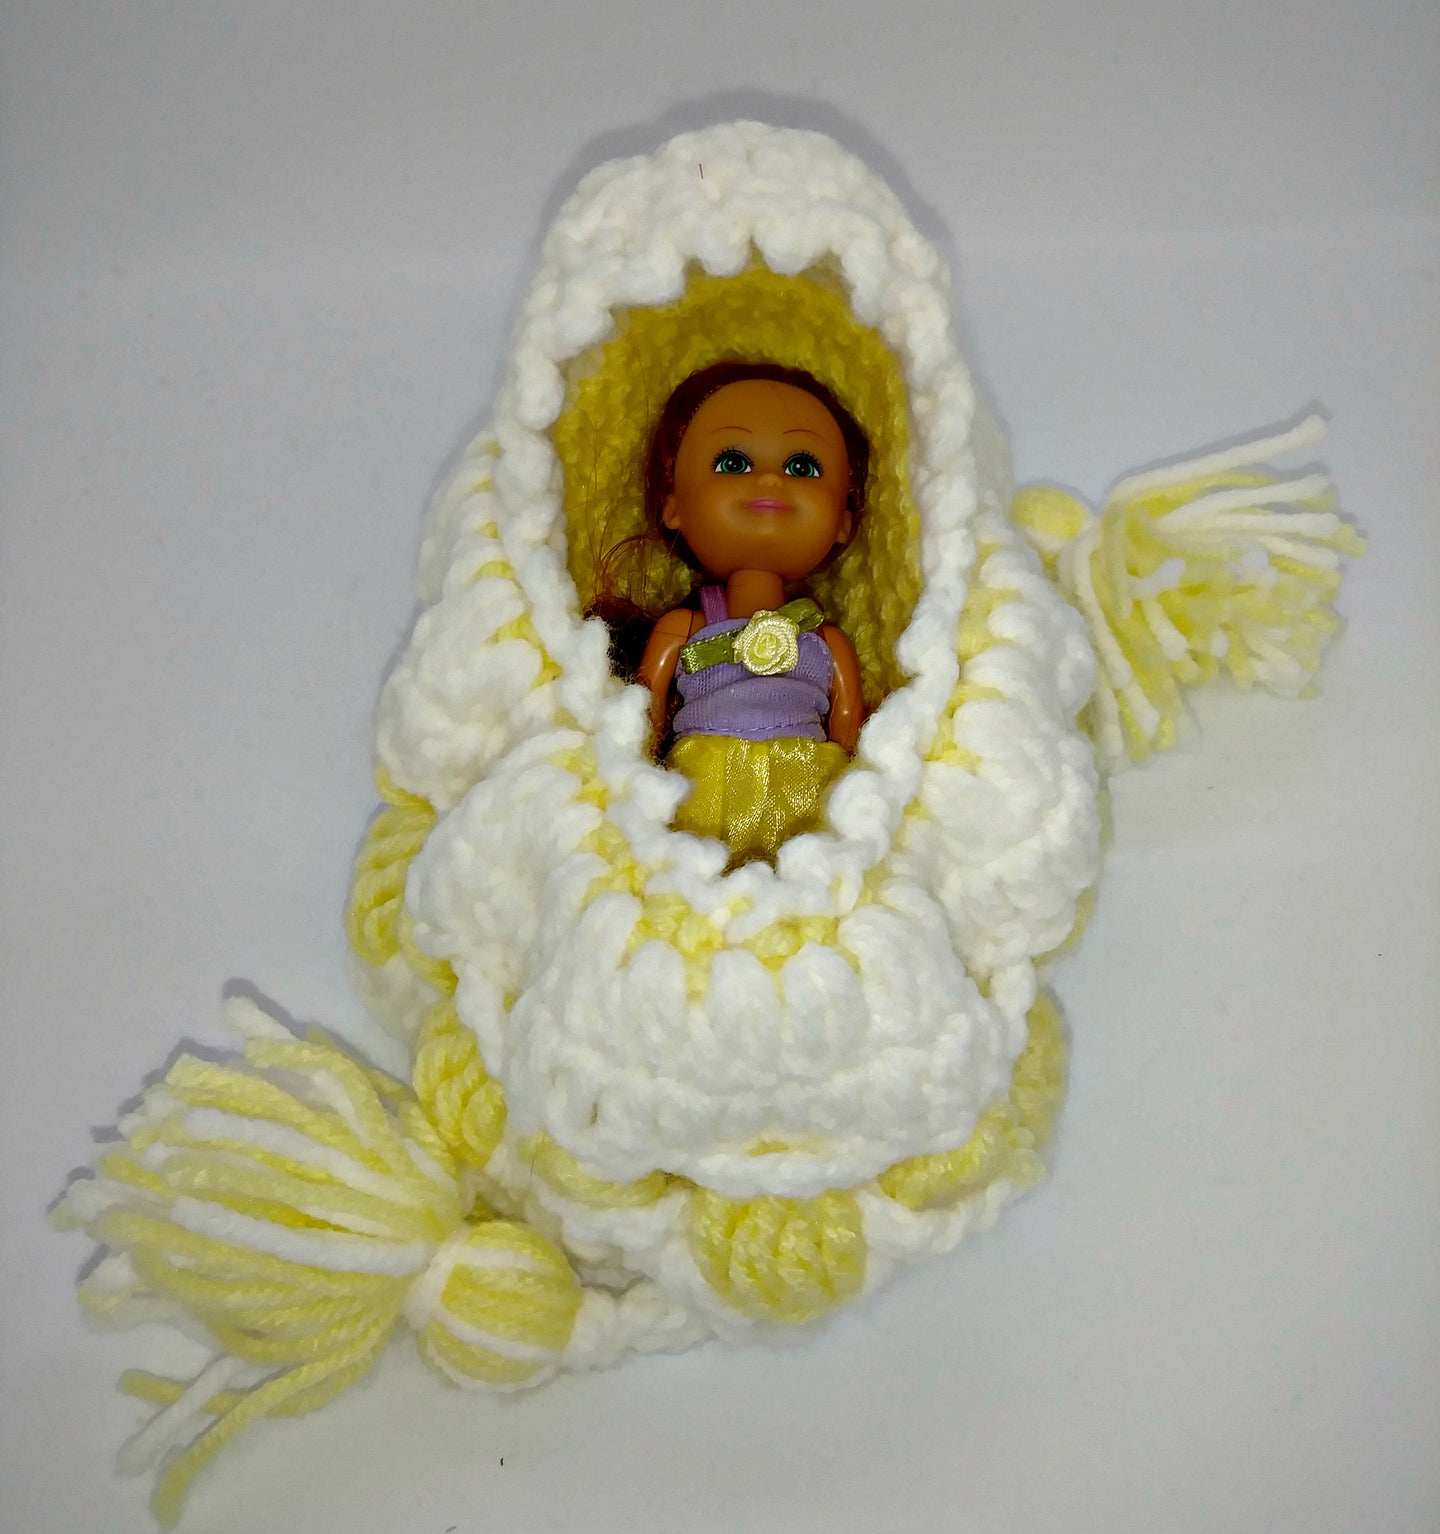 Little Girl's Bassinette Purse With Doll